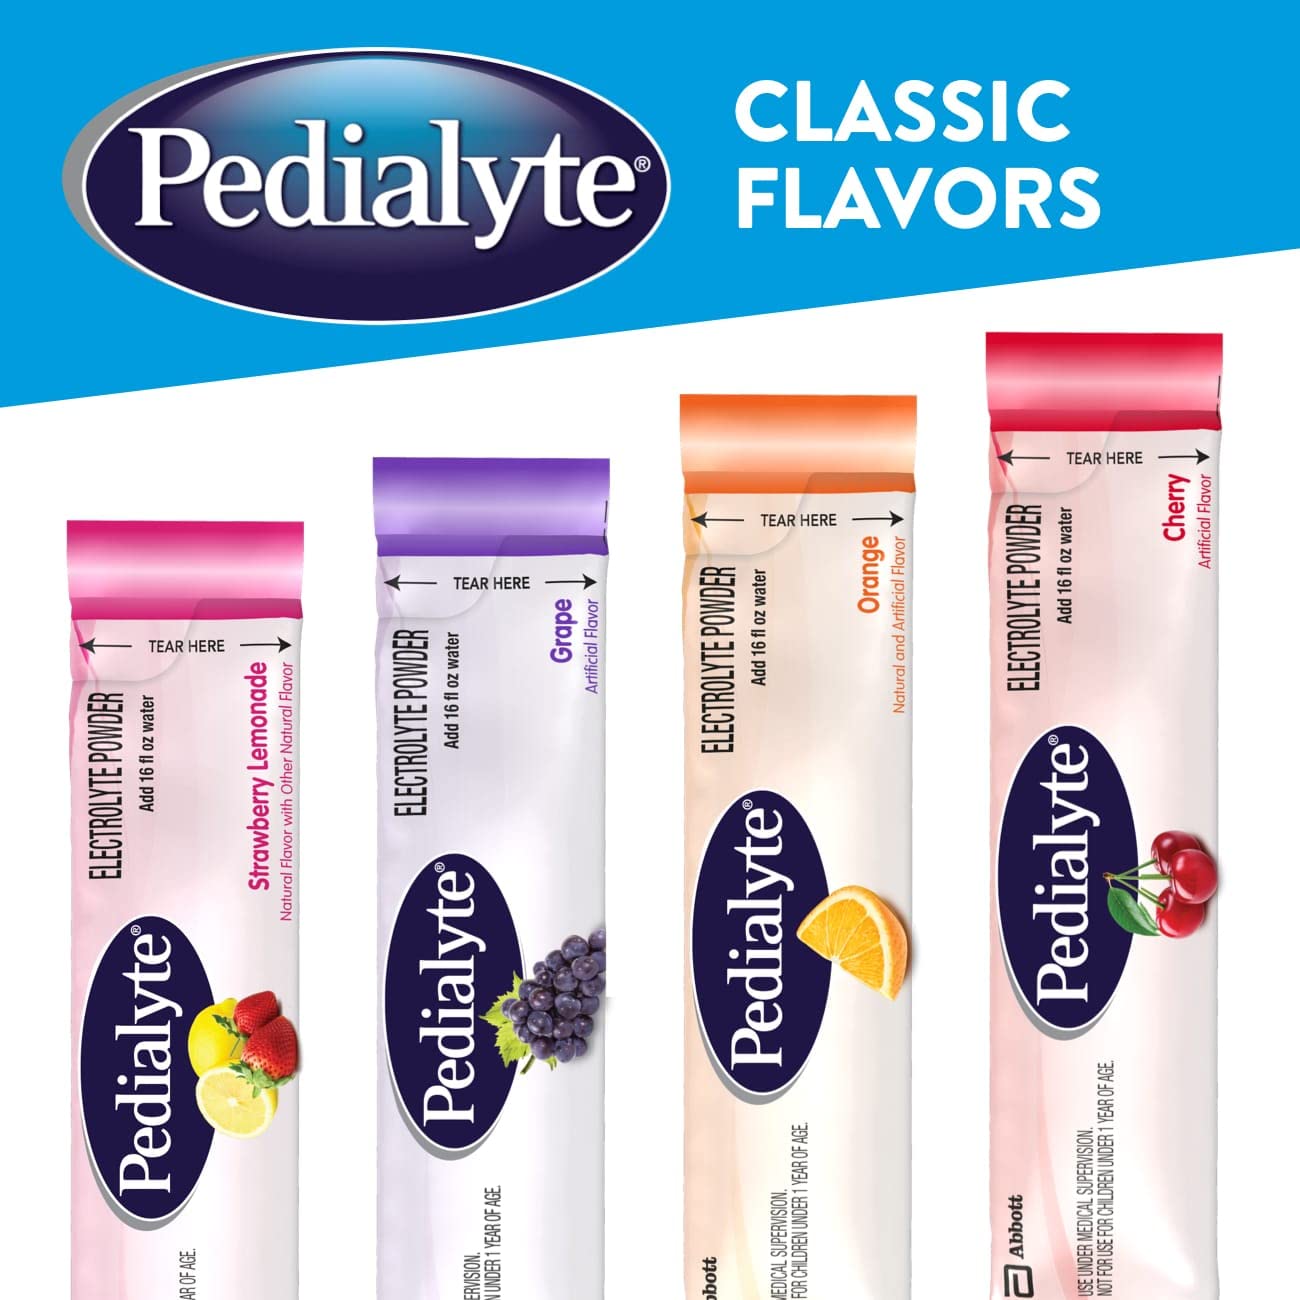 Pedialyte Electrolyte Powder Packets, Cherry, Hydration Drink, 18 Single-Serving Powder Packets